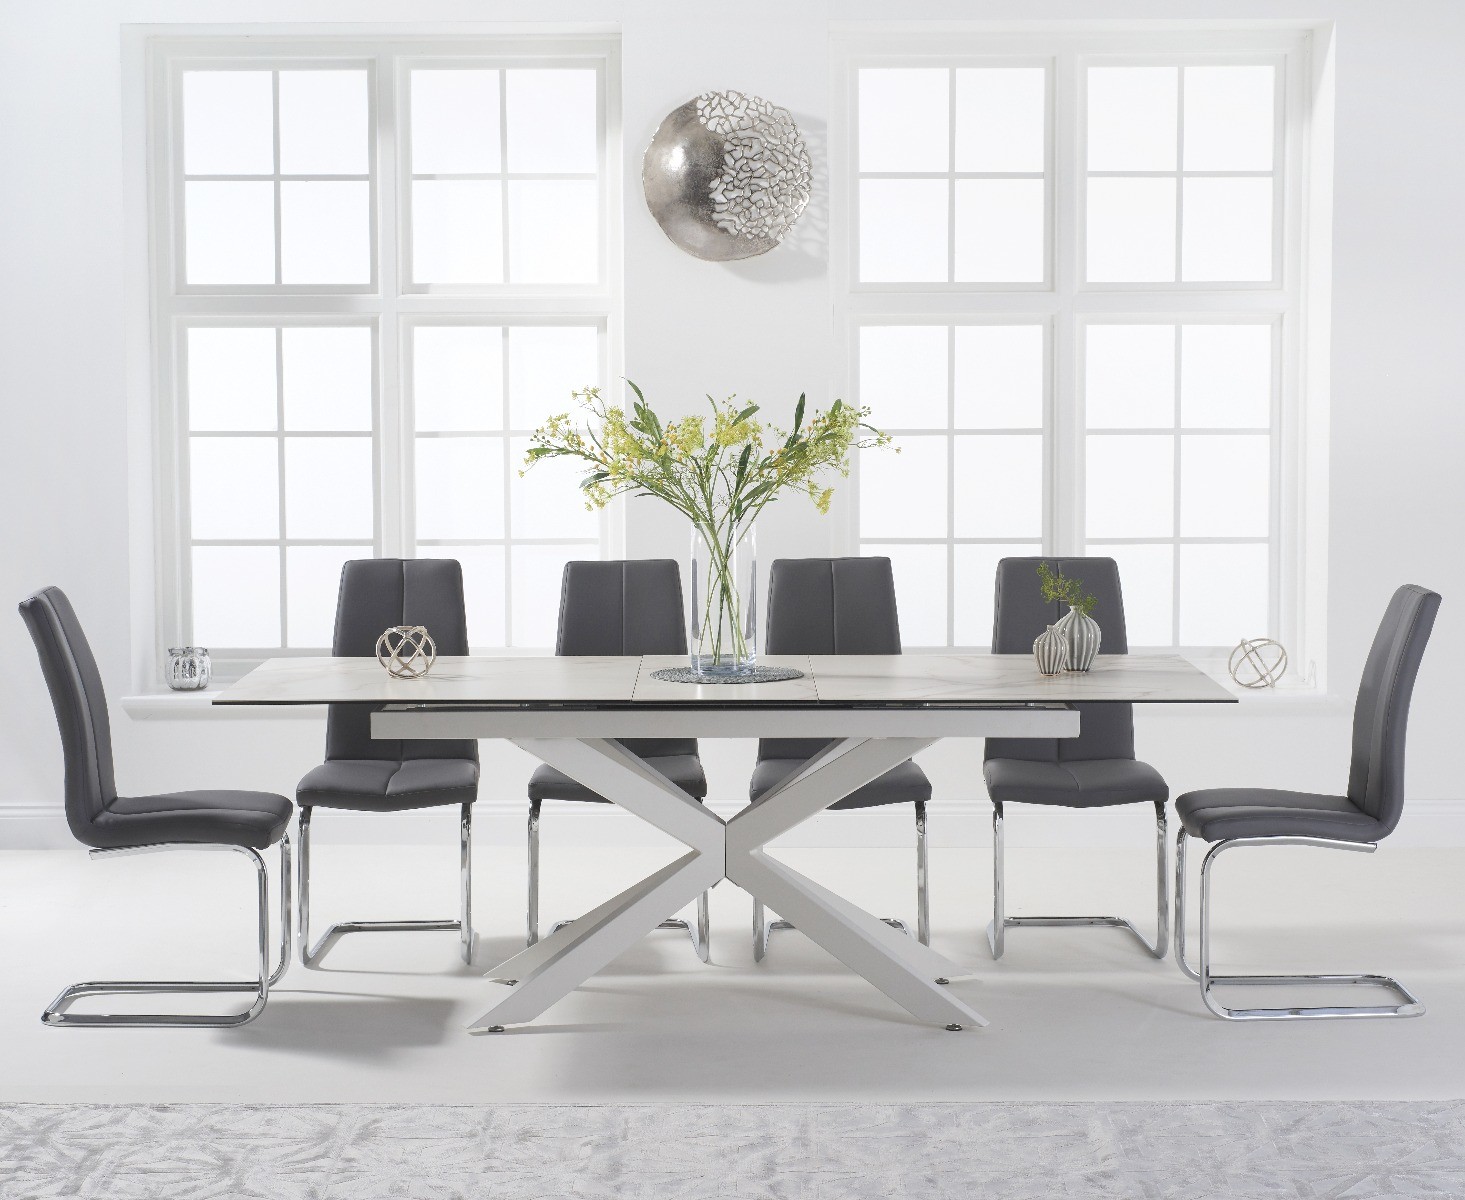 Boston 180cm White Leg Extending Ceramic Dining Table With 8 Grey Tarin Chairs